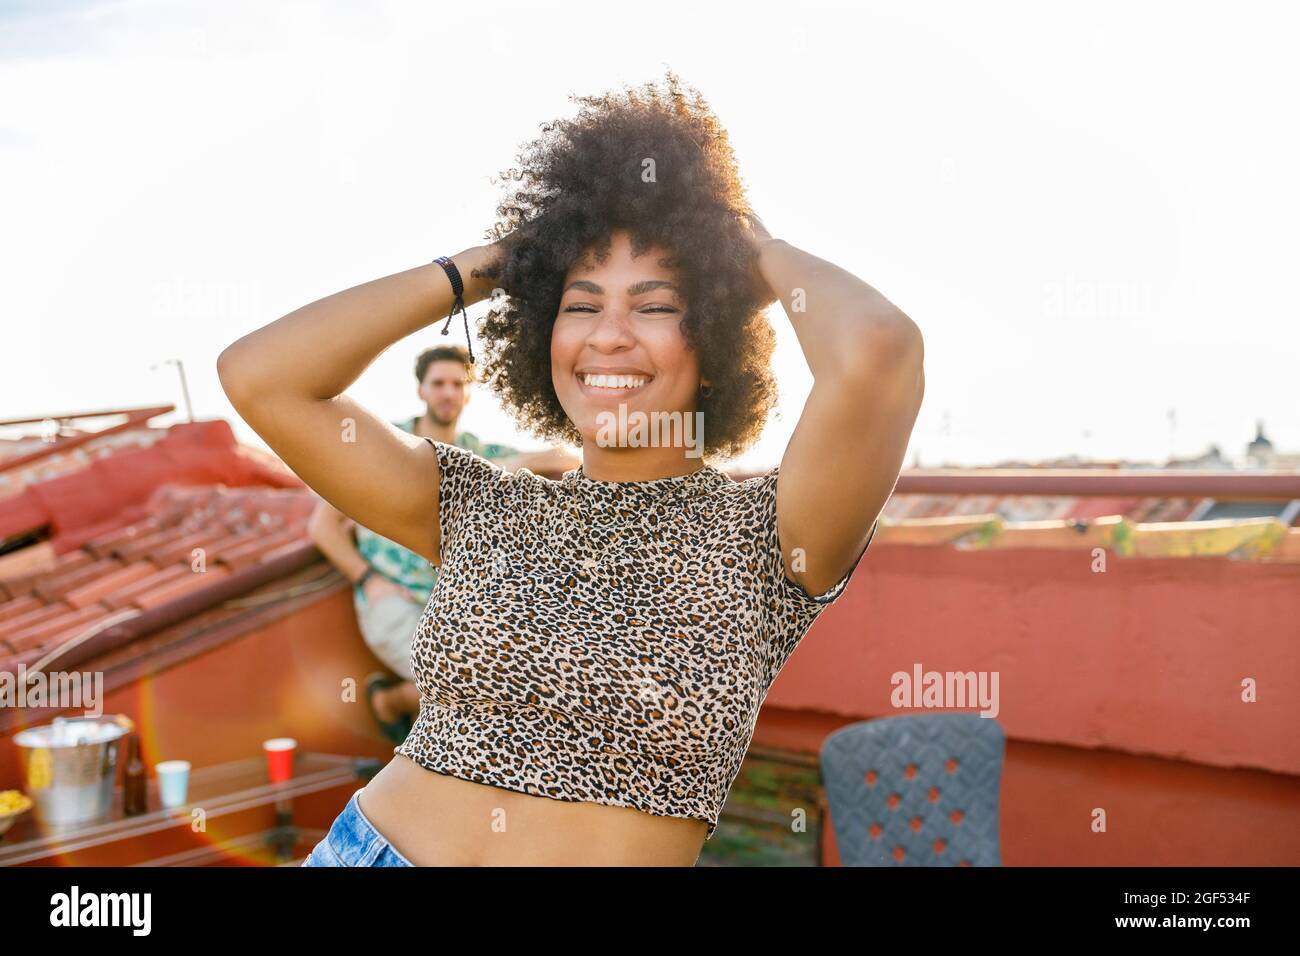 Cheerful Afro woman dancing with hands in hair on rooftop Stock Photo